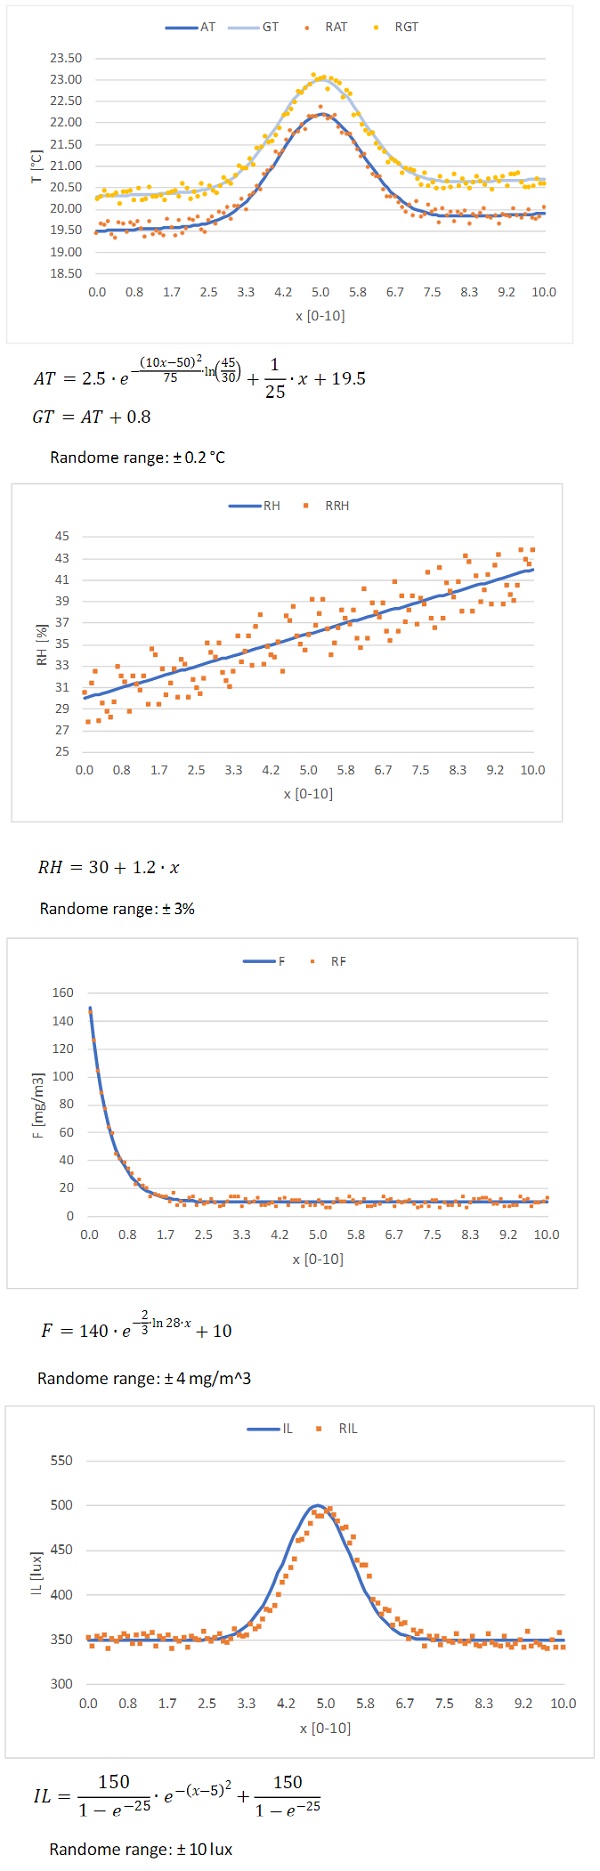 Fig. 1: Charts with the input trend curves for some parameters and the corresponding results after the randomize process.